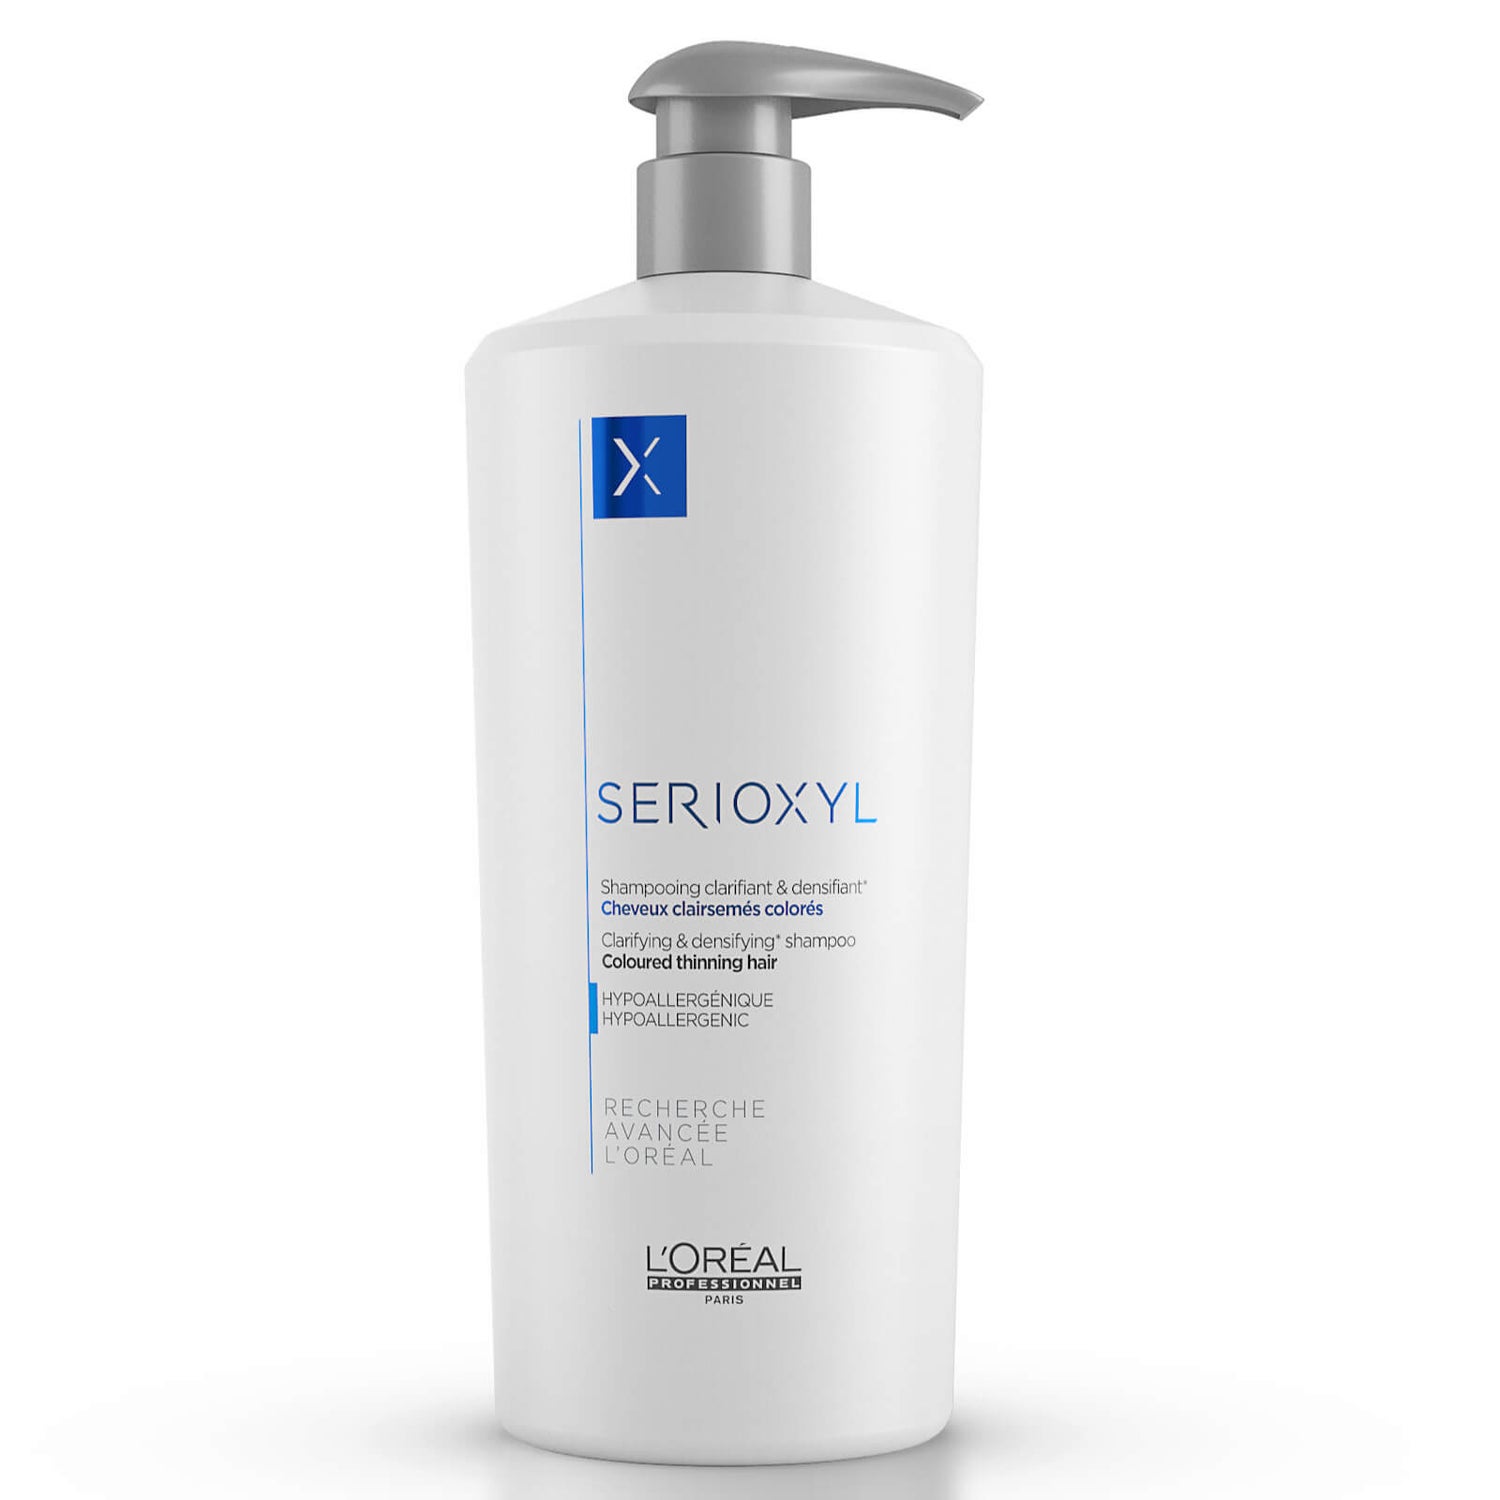 L'Oréal Professionnel Serioxyl Conditioner for Coloured Thinning Hair -hoitoaine, 1 000 ml